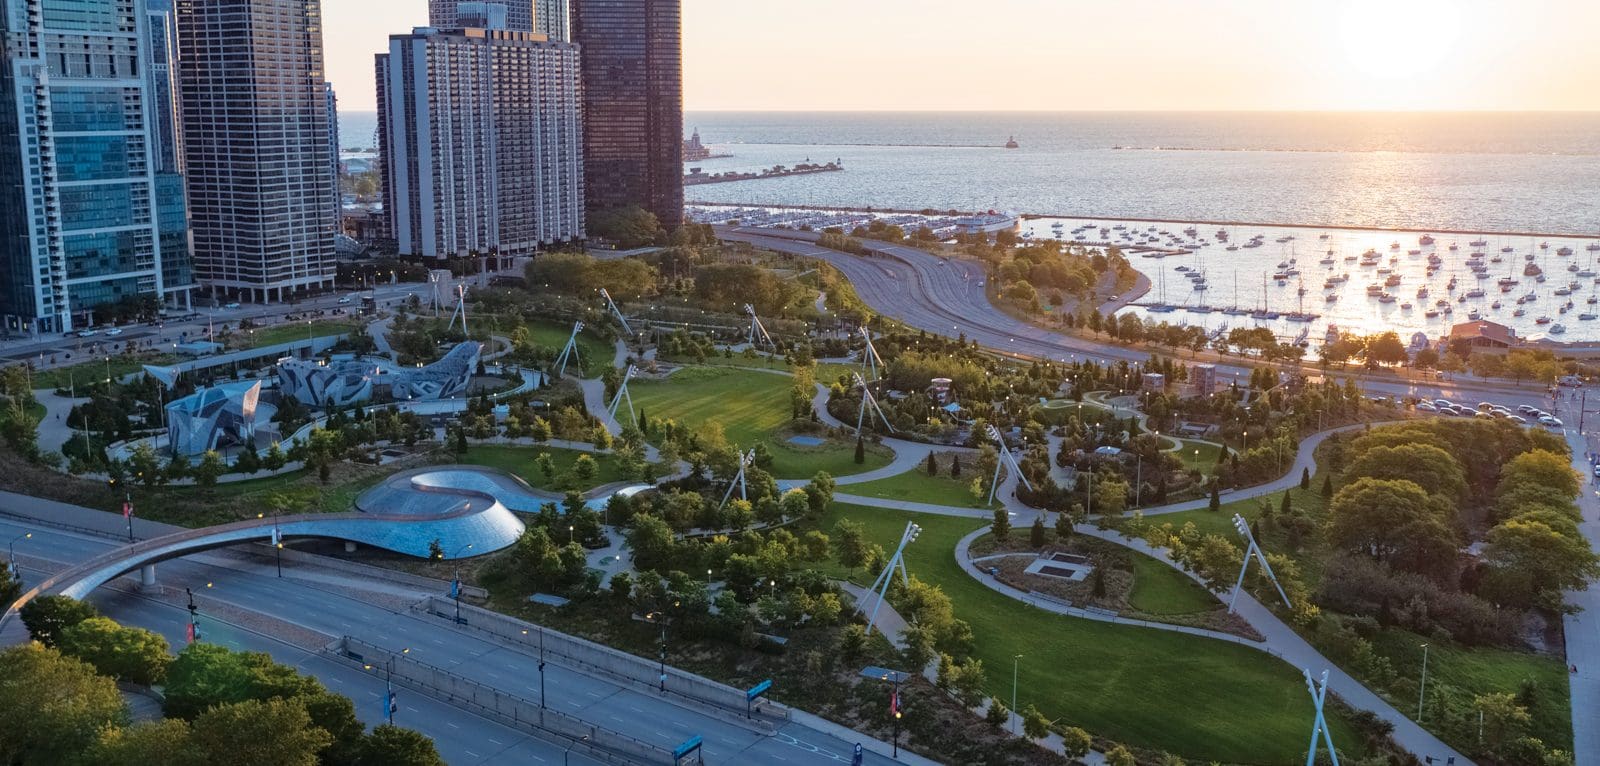 An aerial view of Maggie Daley Park, one of the best kids activities in Chicago.